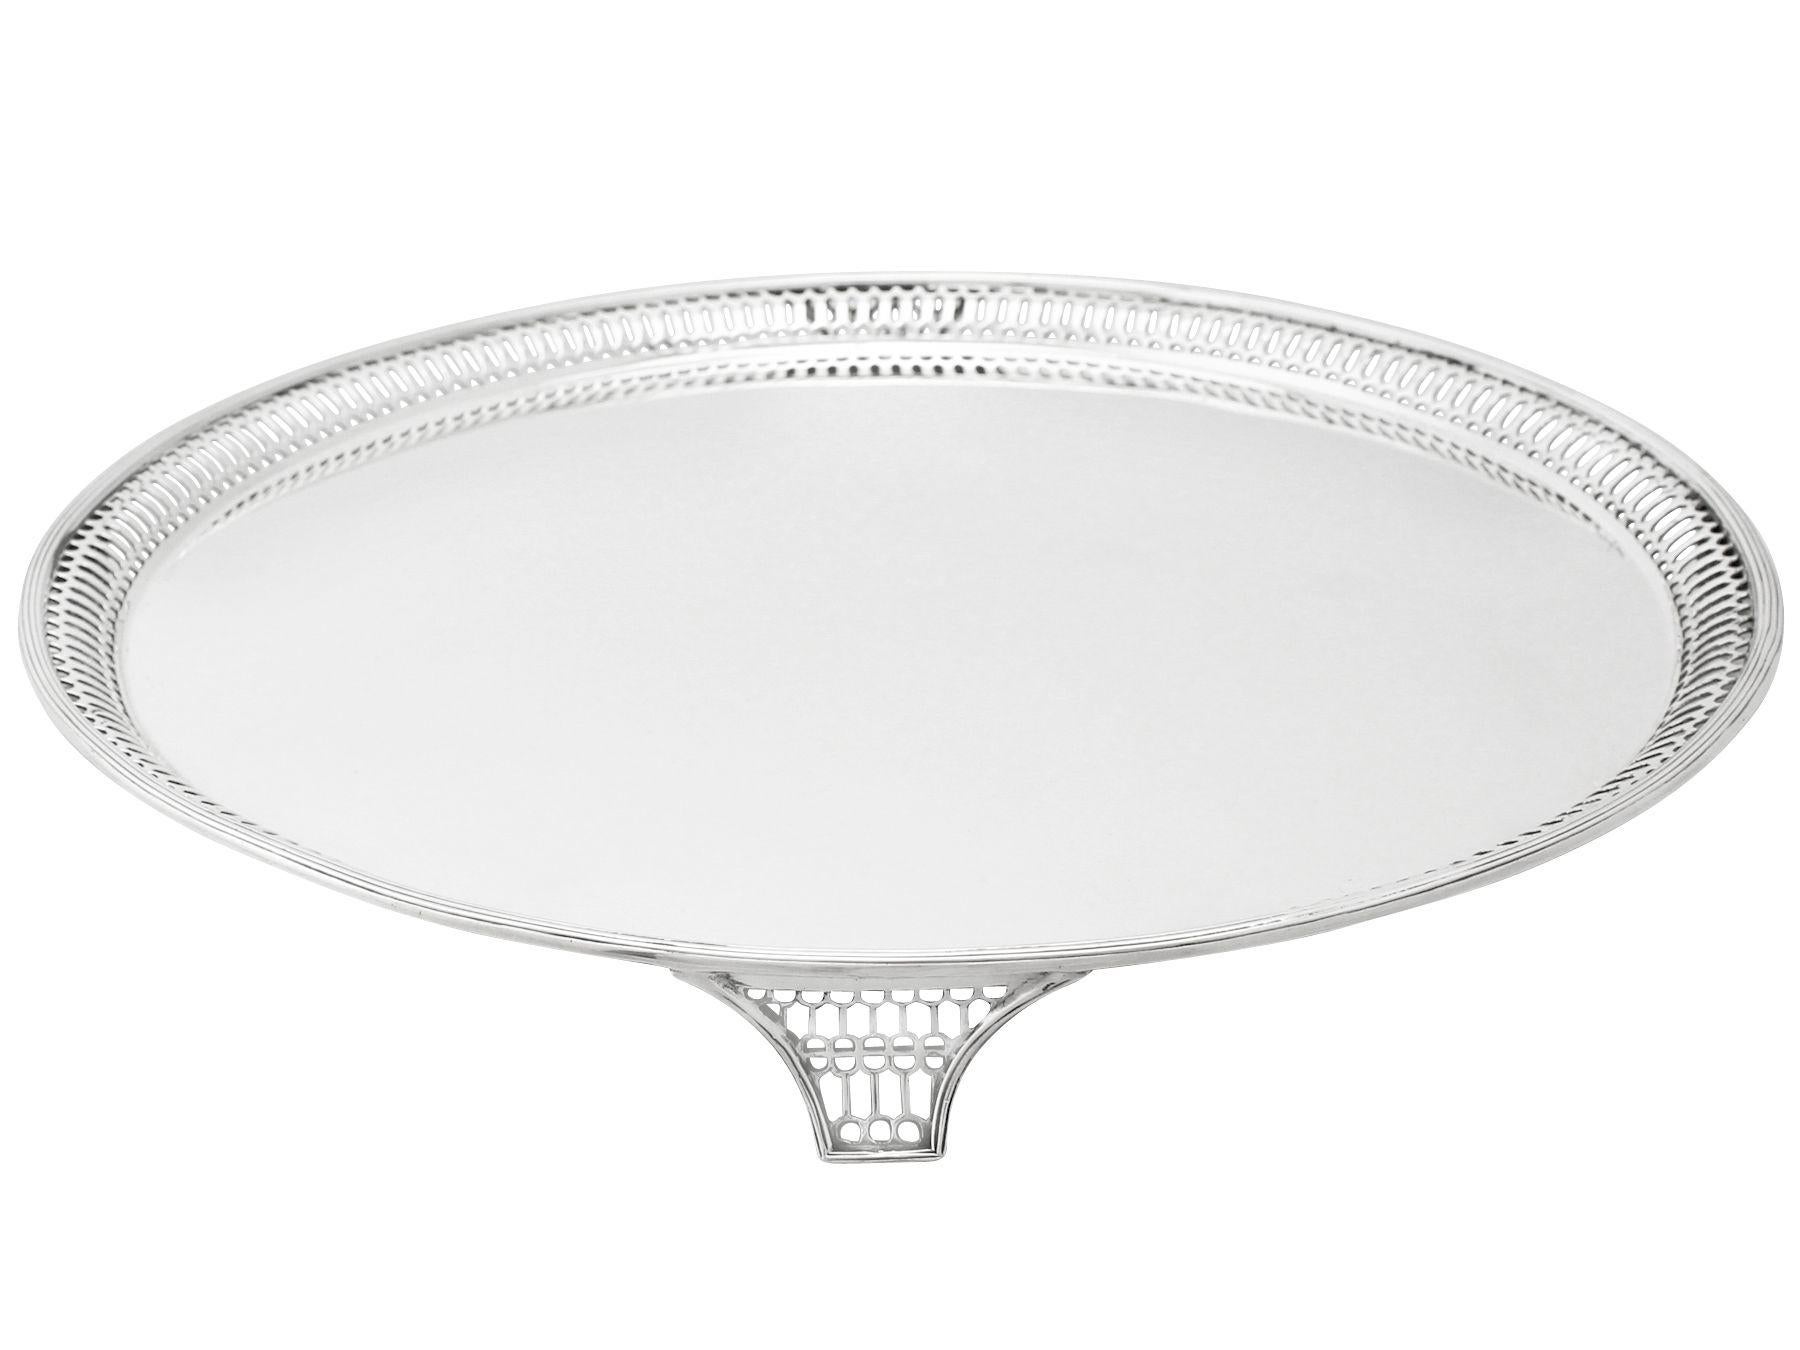 English 20th Century Antique George V Sterling Silver Salver by Thomas Bradbury & Sons For Sale